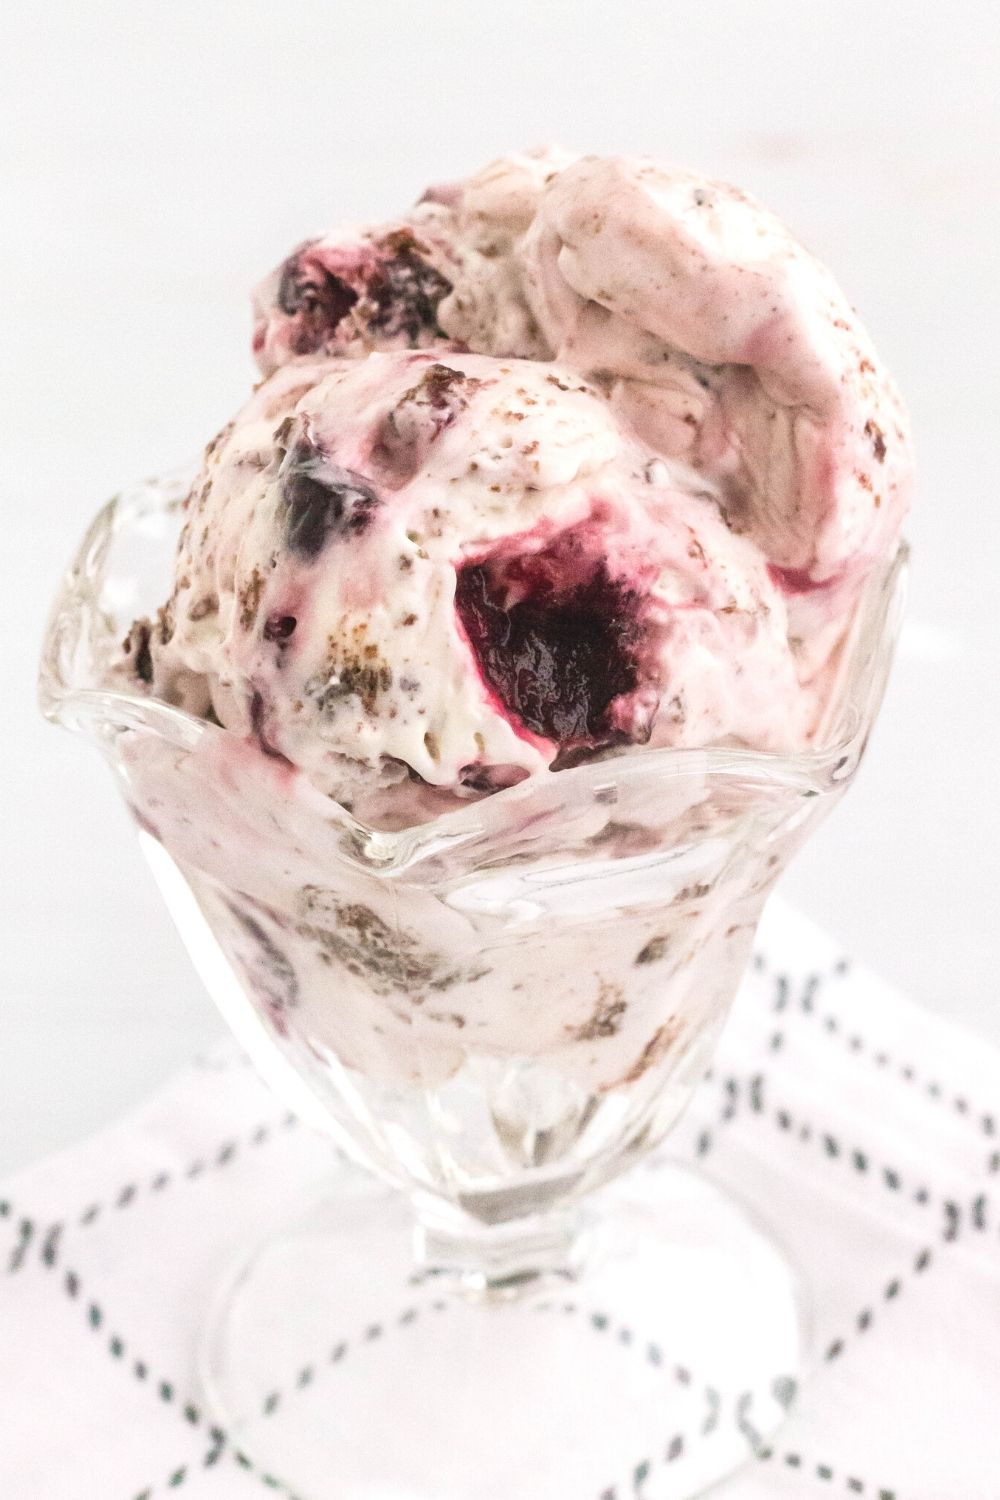 a glass ice cream dish serves scoops of homemade black forest ice cream, showing the chocolate pieces and sweet dark cherries.